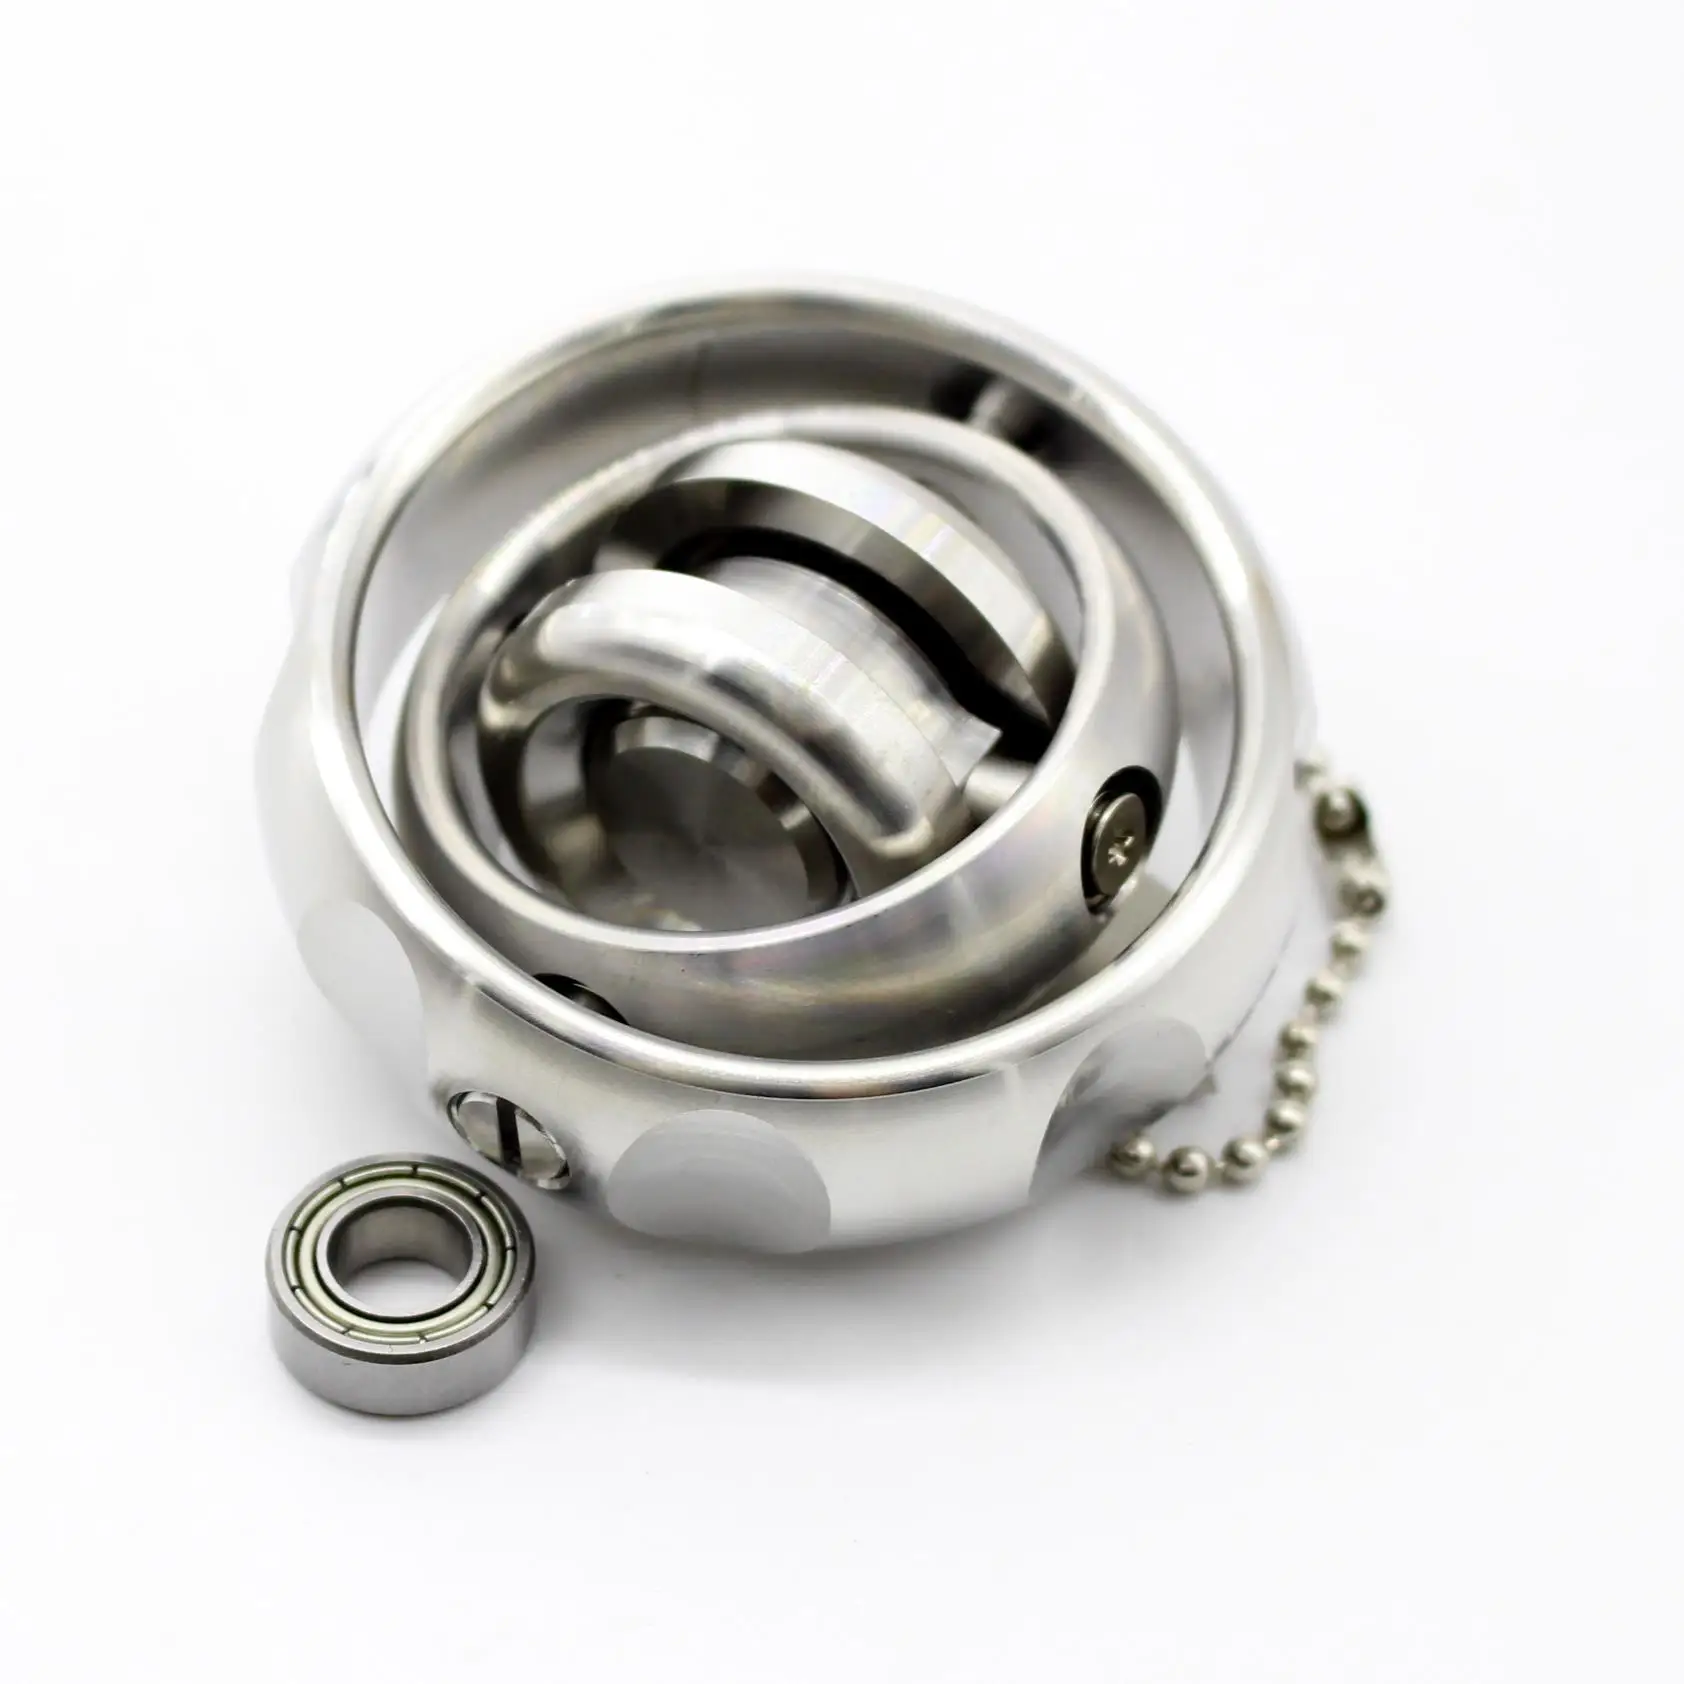 Spinning Gyroscope Metal Gyroscope Second Generation Fingertip Gyro Decompression Toy Technology Mechanical 3D Physical Toy Edc enlarge